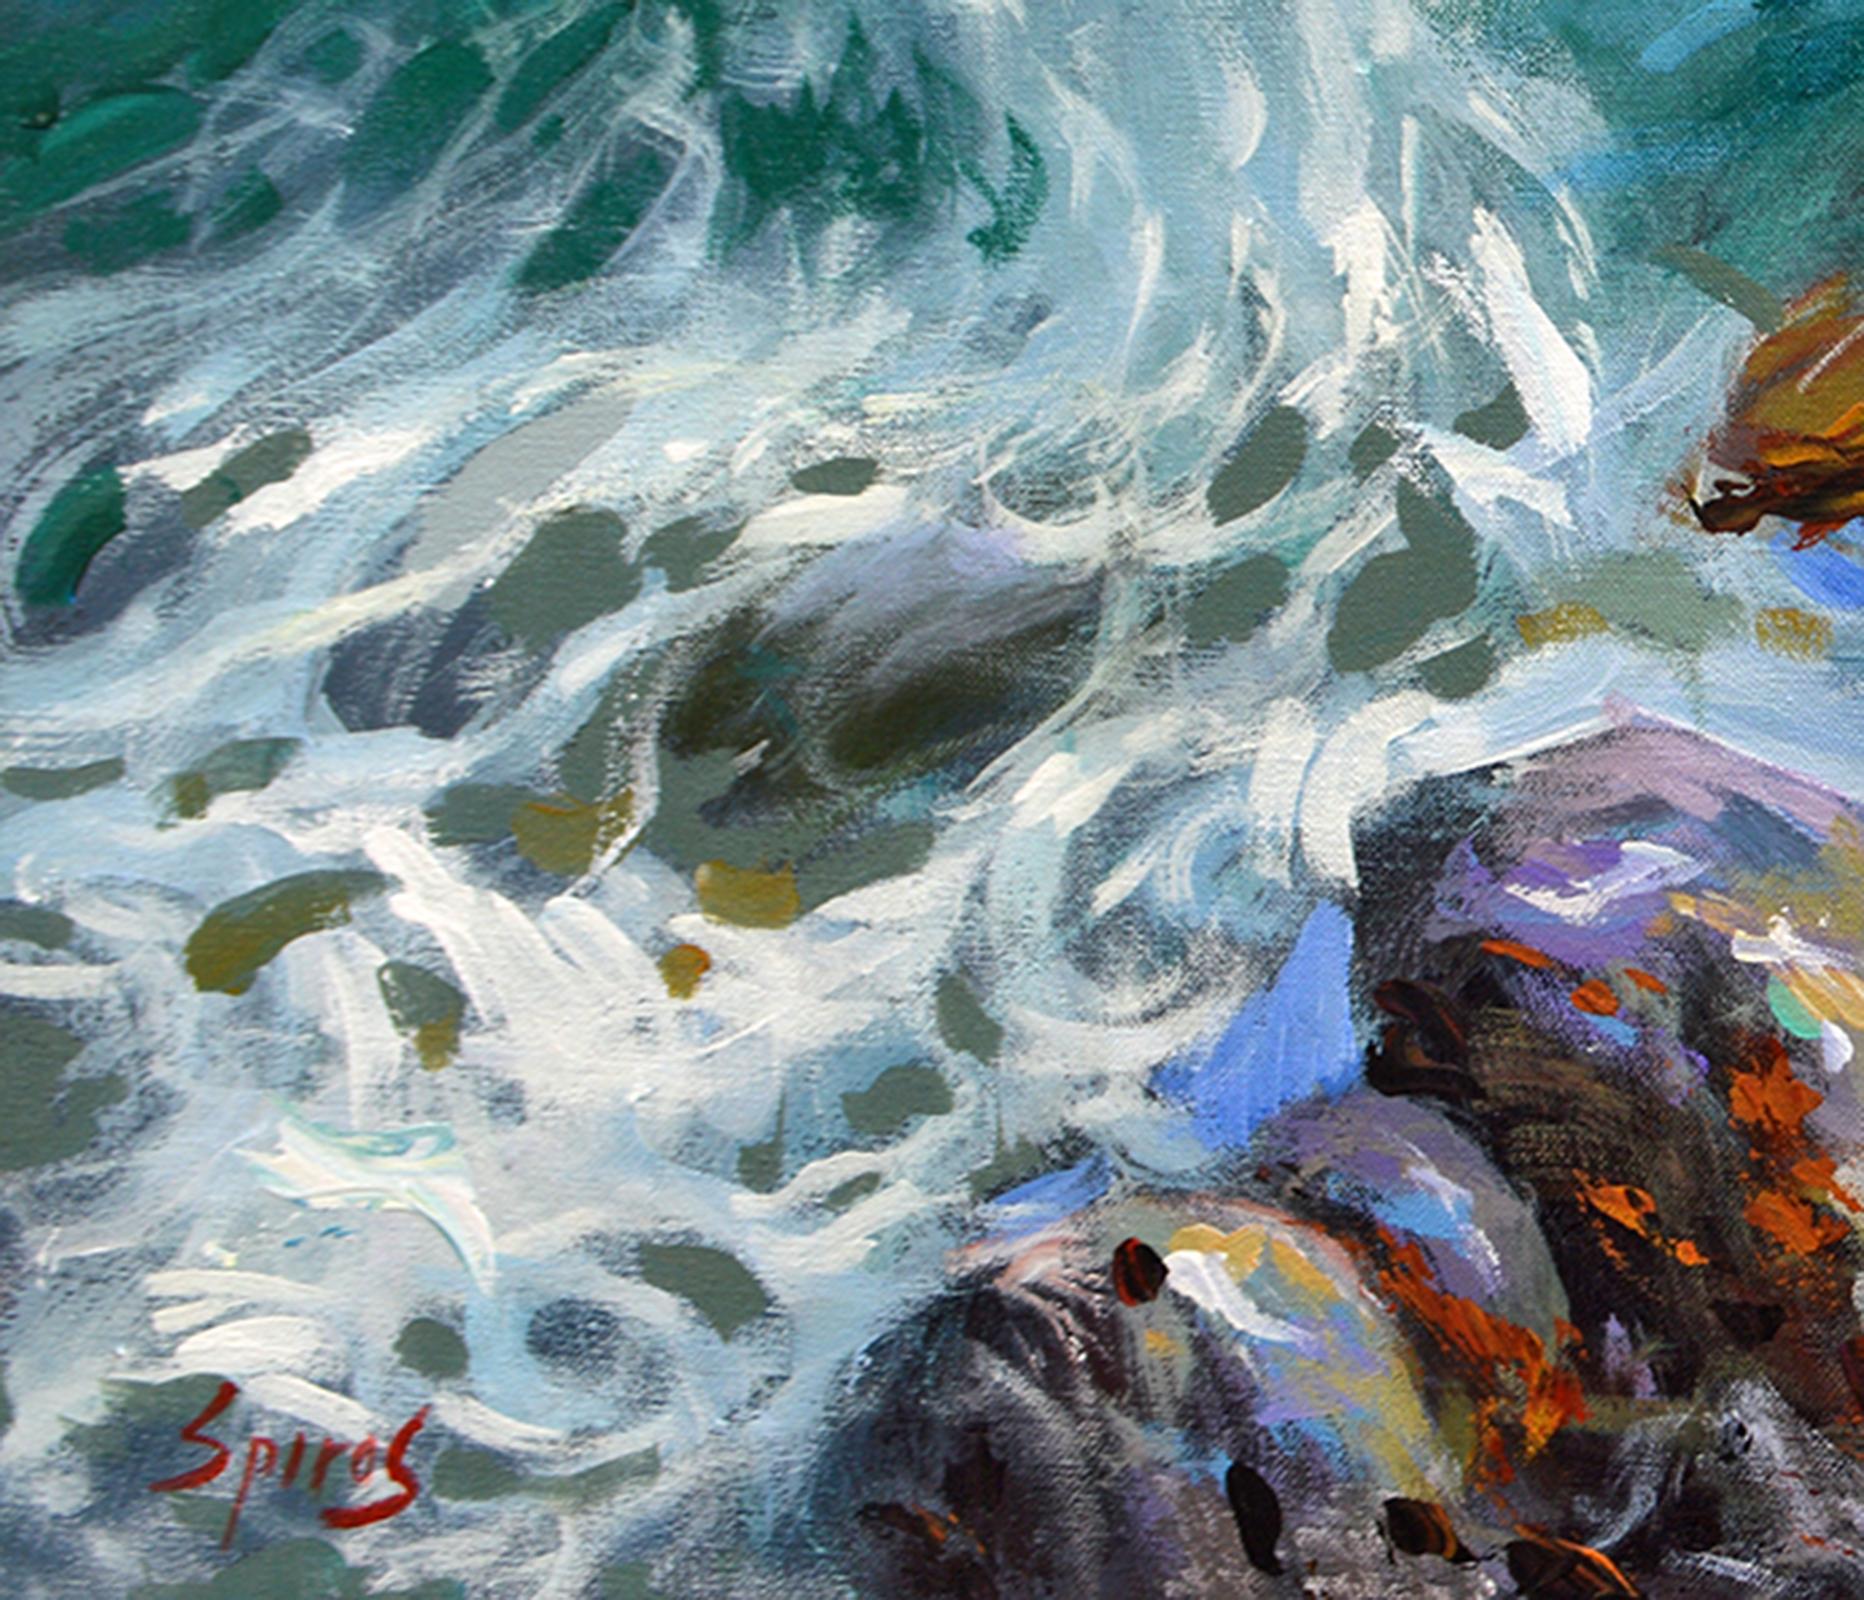 Caribbean waves at noon - Painting by Dmitry Spiros